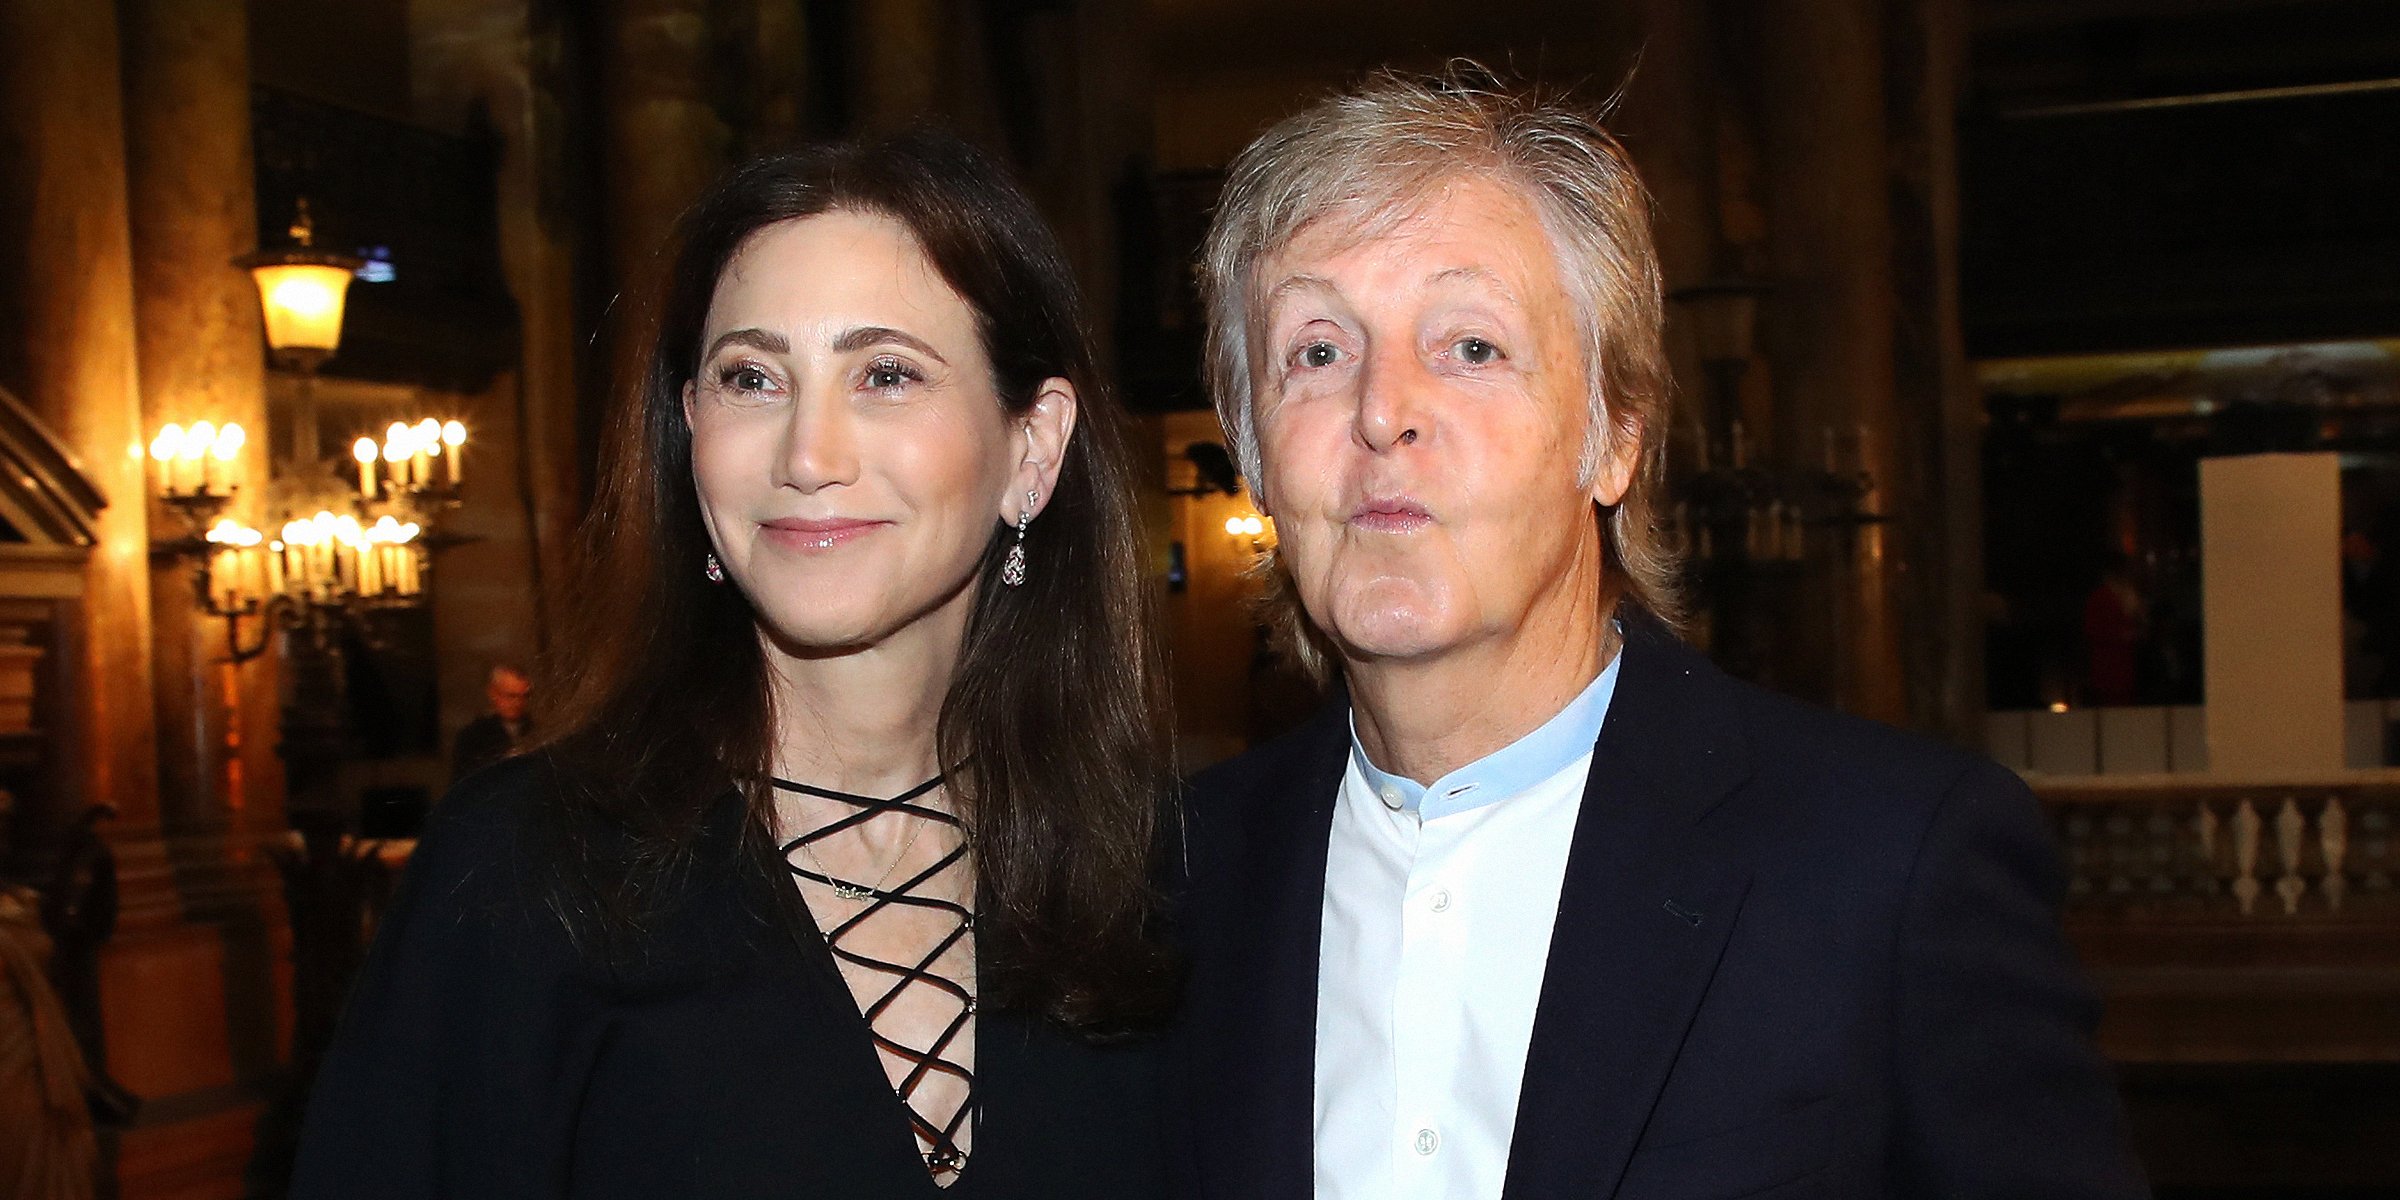 Nancy Shevell and Paul McCartney. | Source: Getty Images